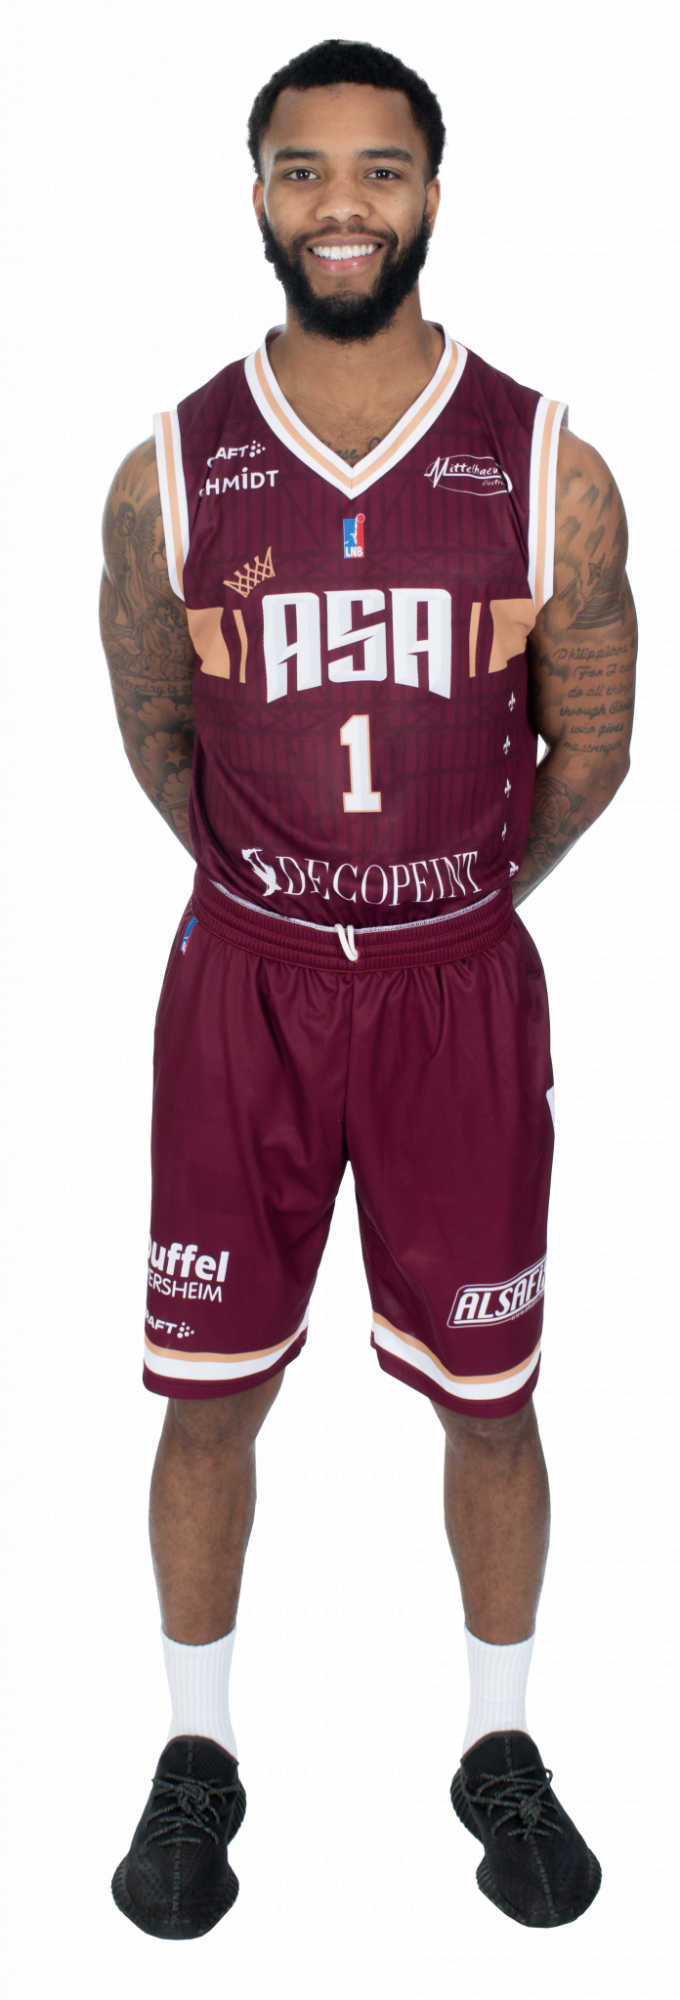 https://www.rouenmetrobasket.com/wp-content/uploads/2022/02/marquis-wright-3.png